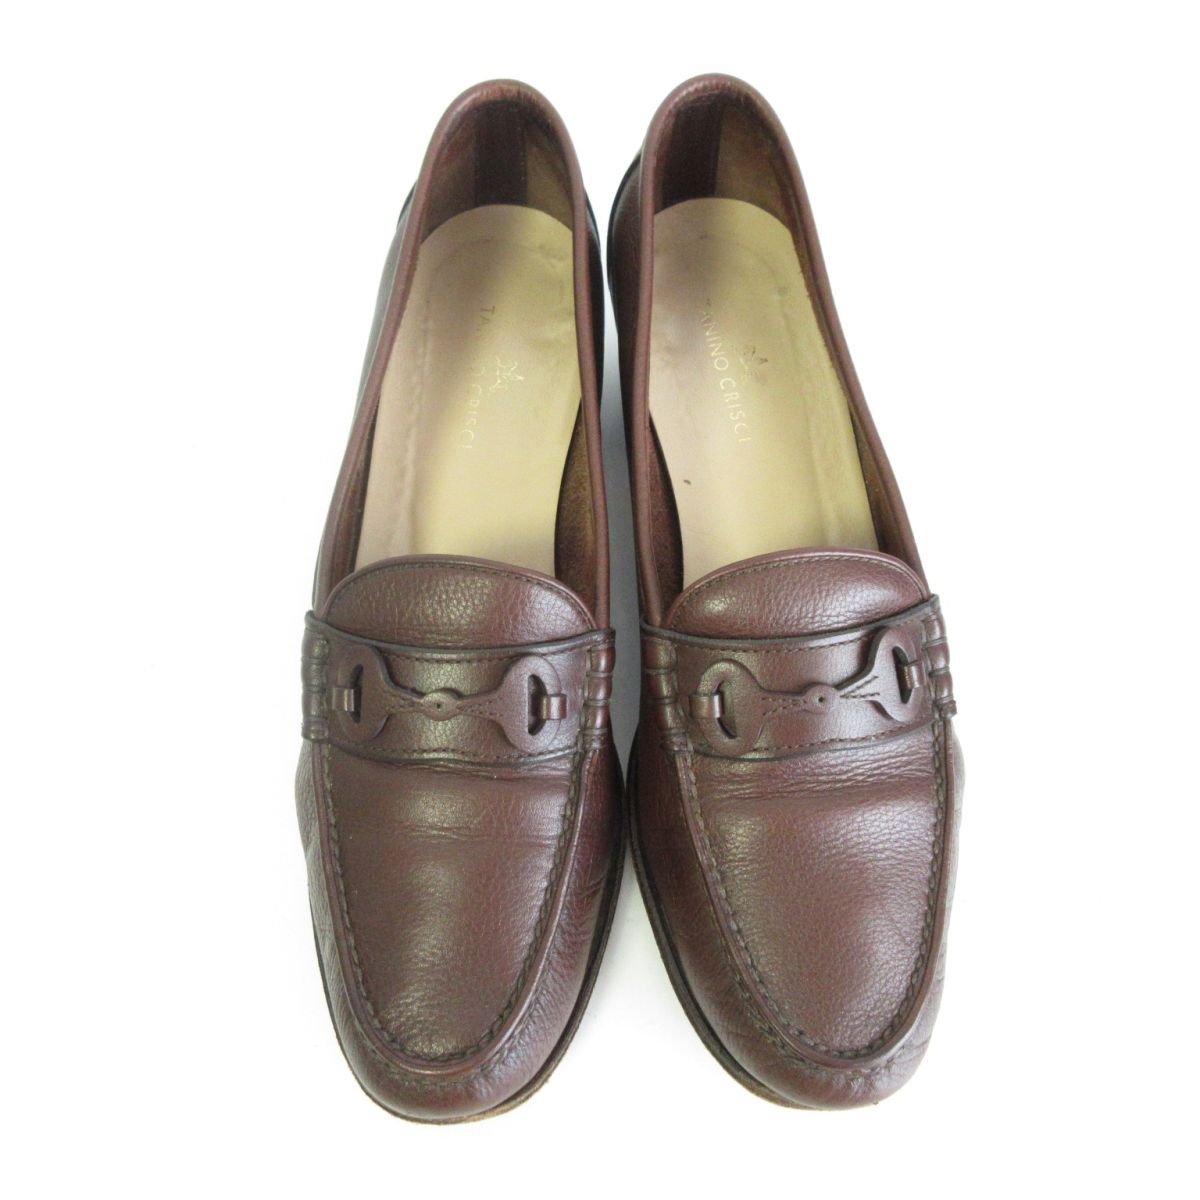  beautiful goods TANINO CRISCItanino Chris chi- leather bit Loafer moccasin 37 approximately 23.5cm Brown 